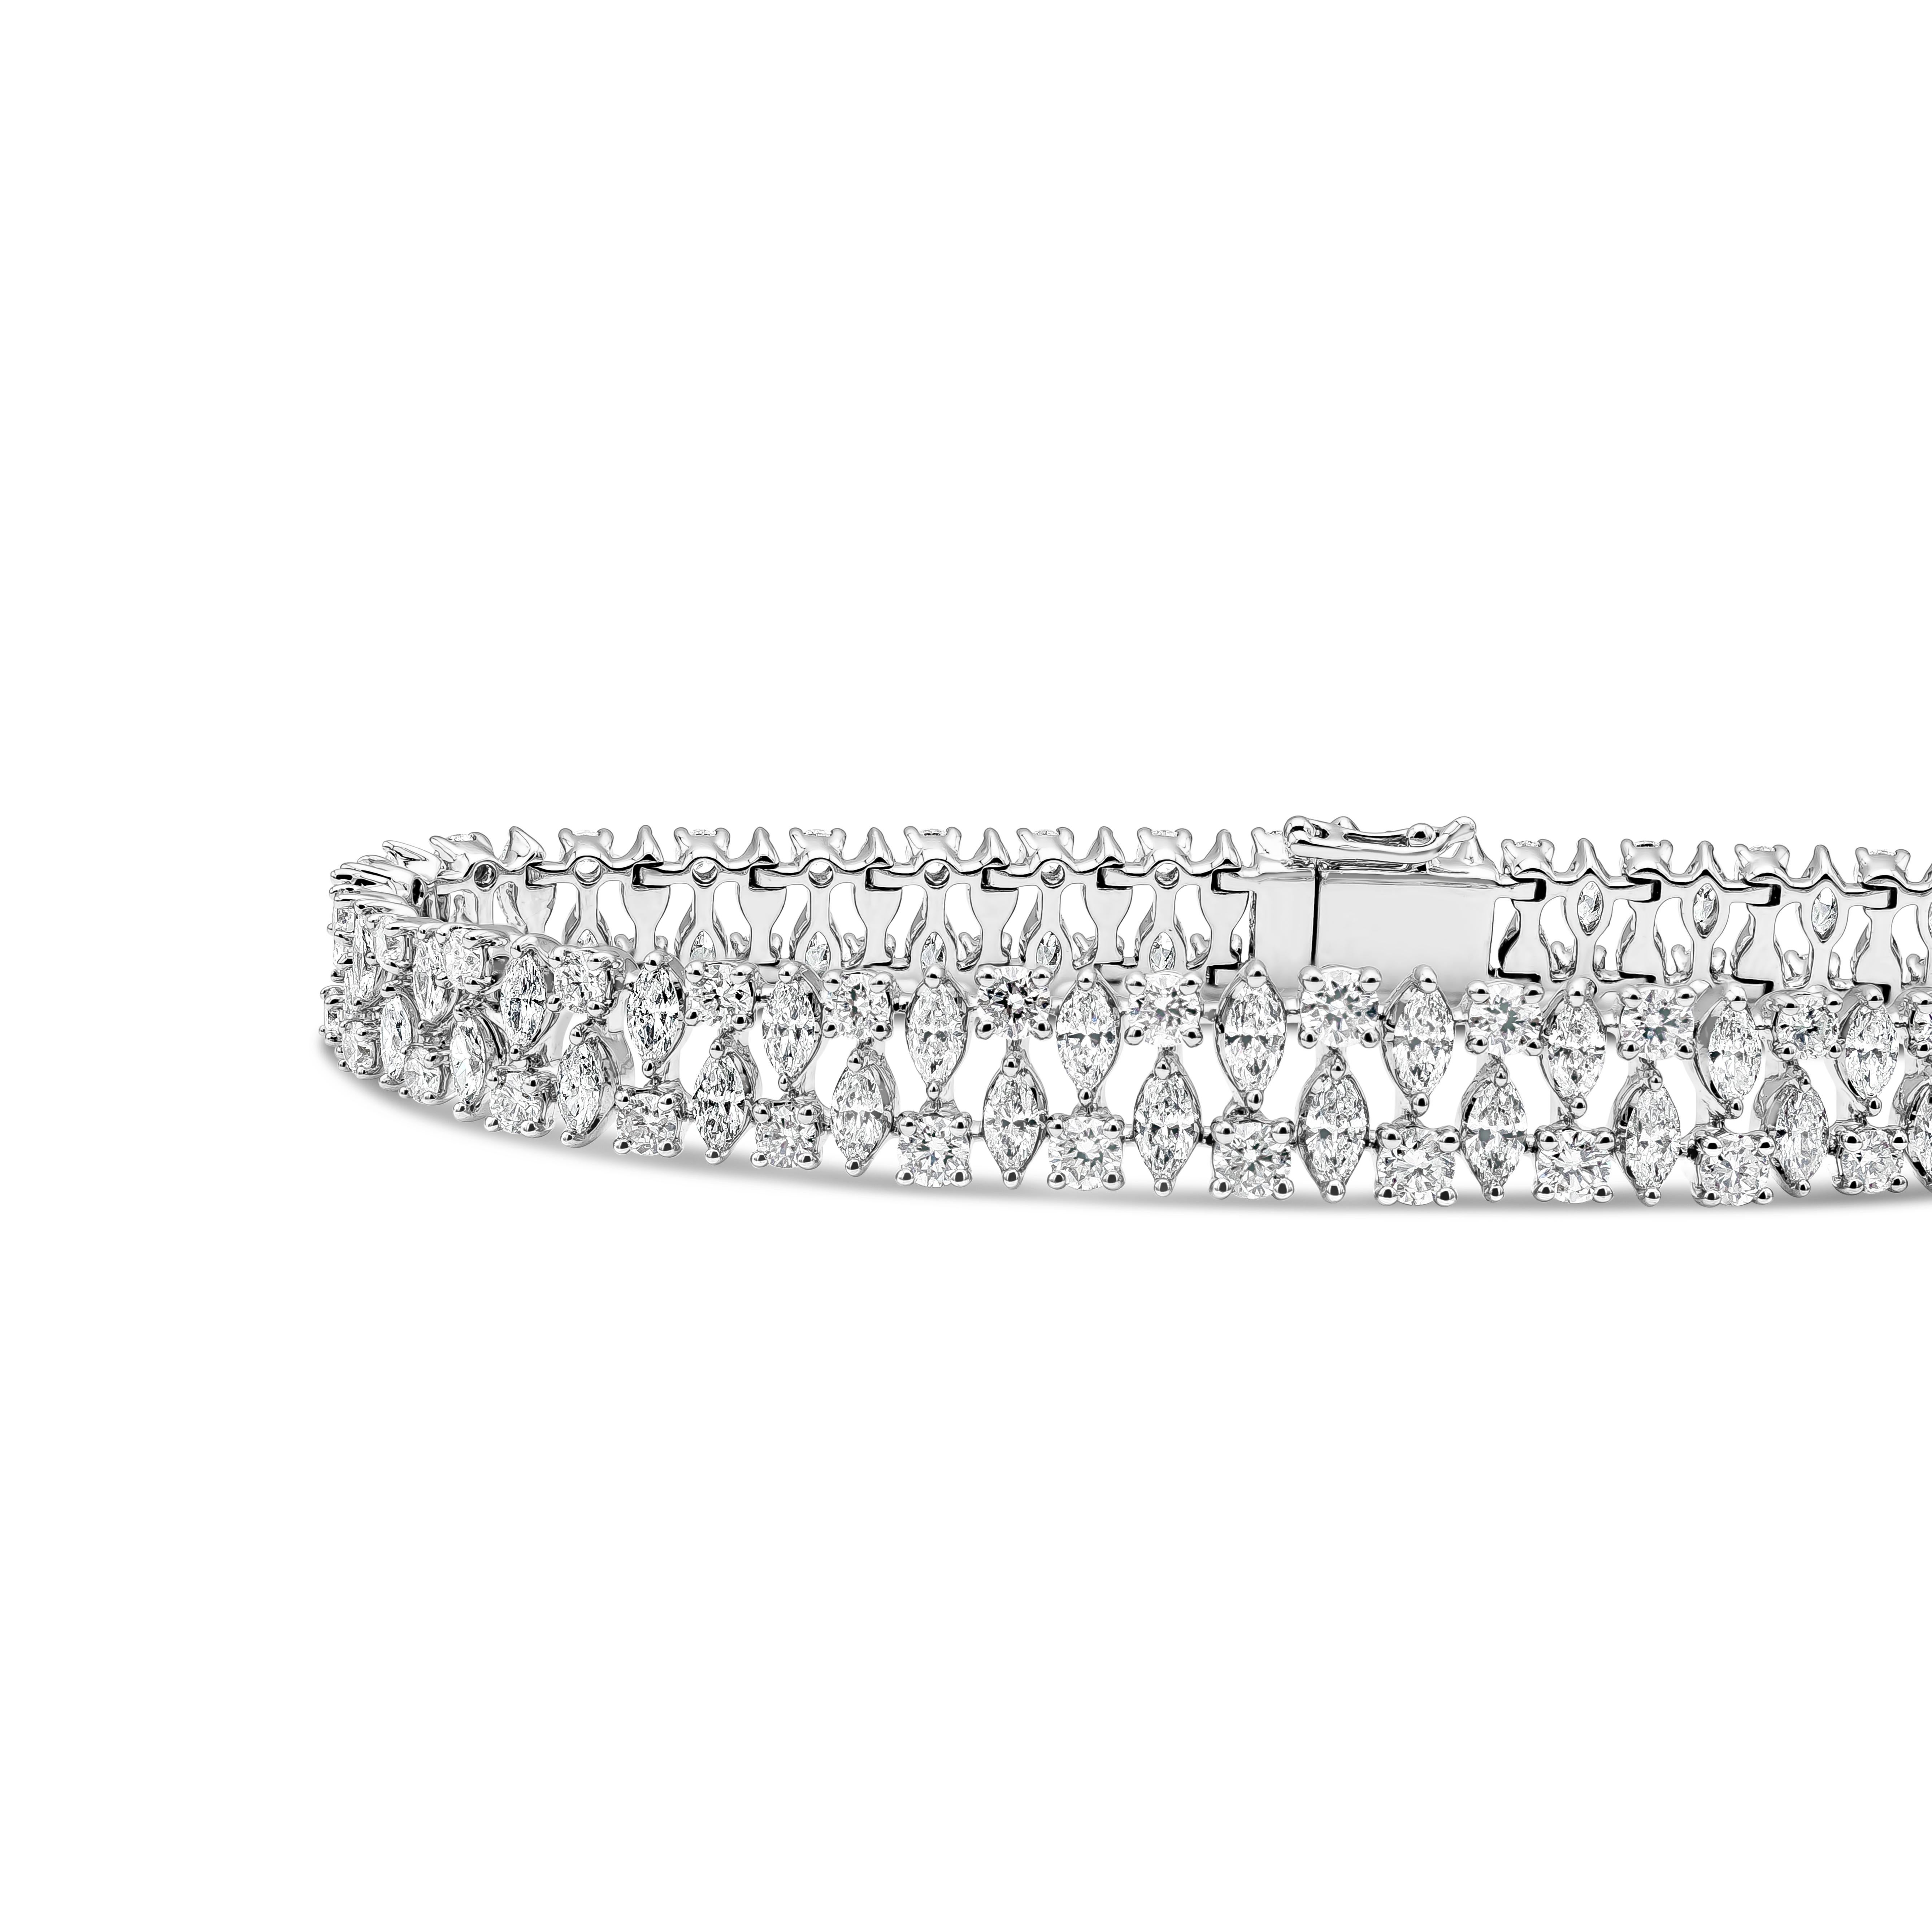 Contemporary Roman Malakov 7.33 Carats Total Marquise and Round Shape Diamond Bracelet For Sale